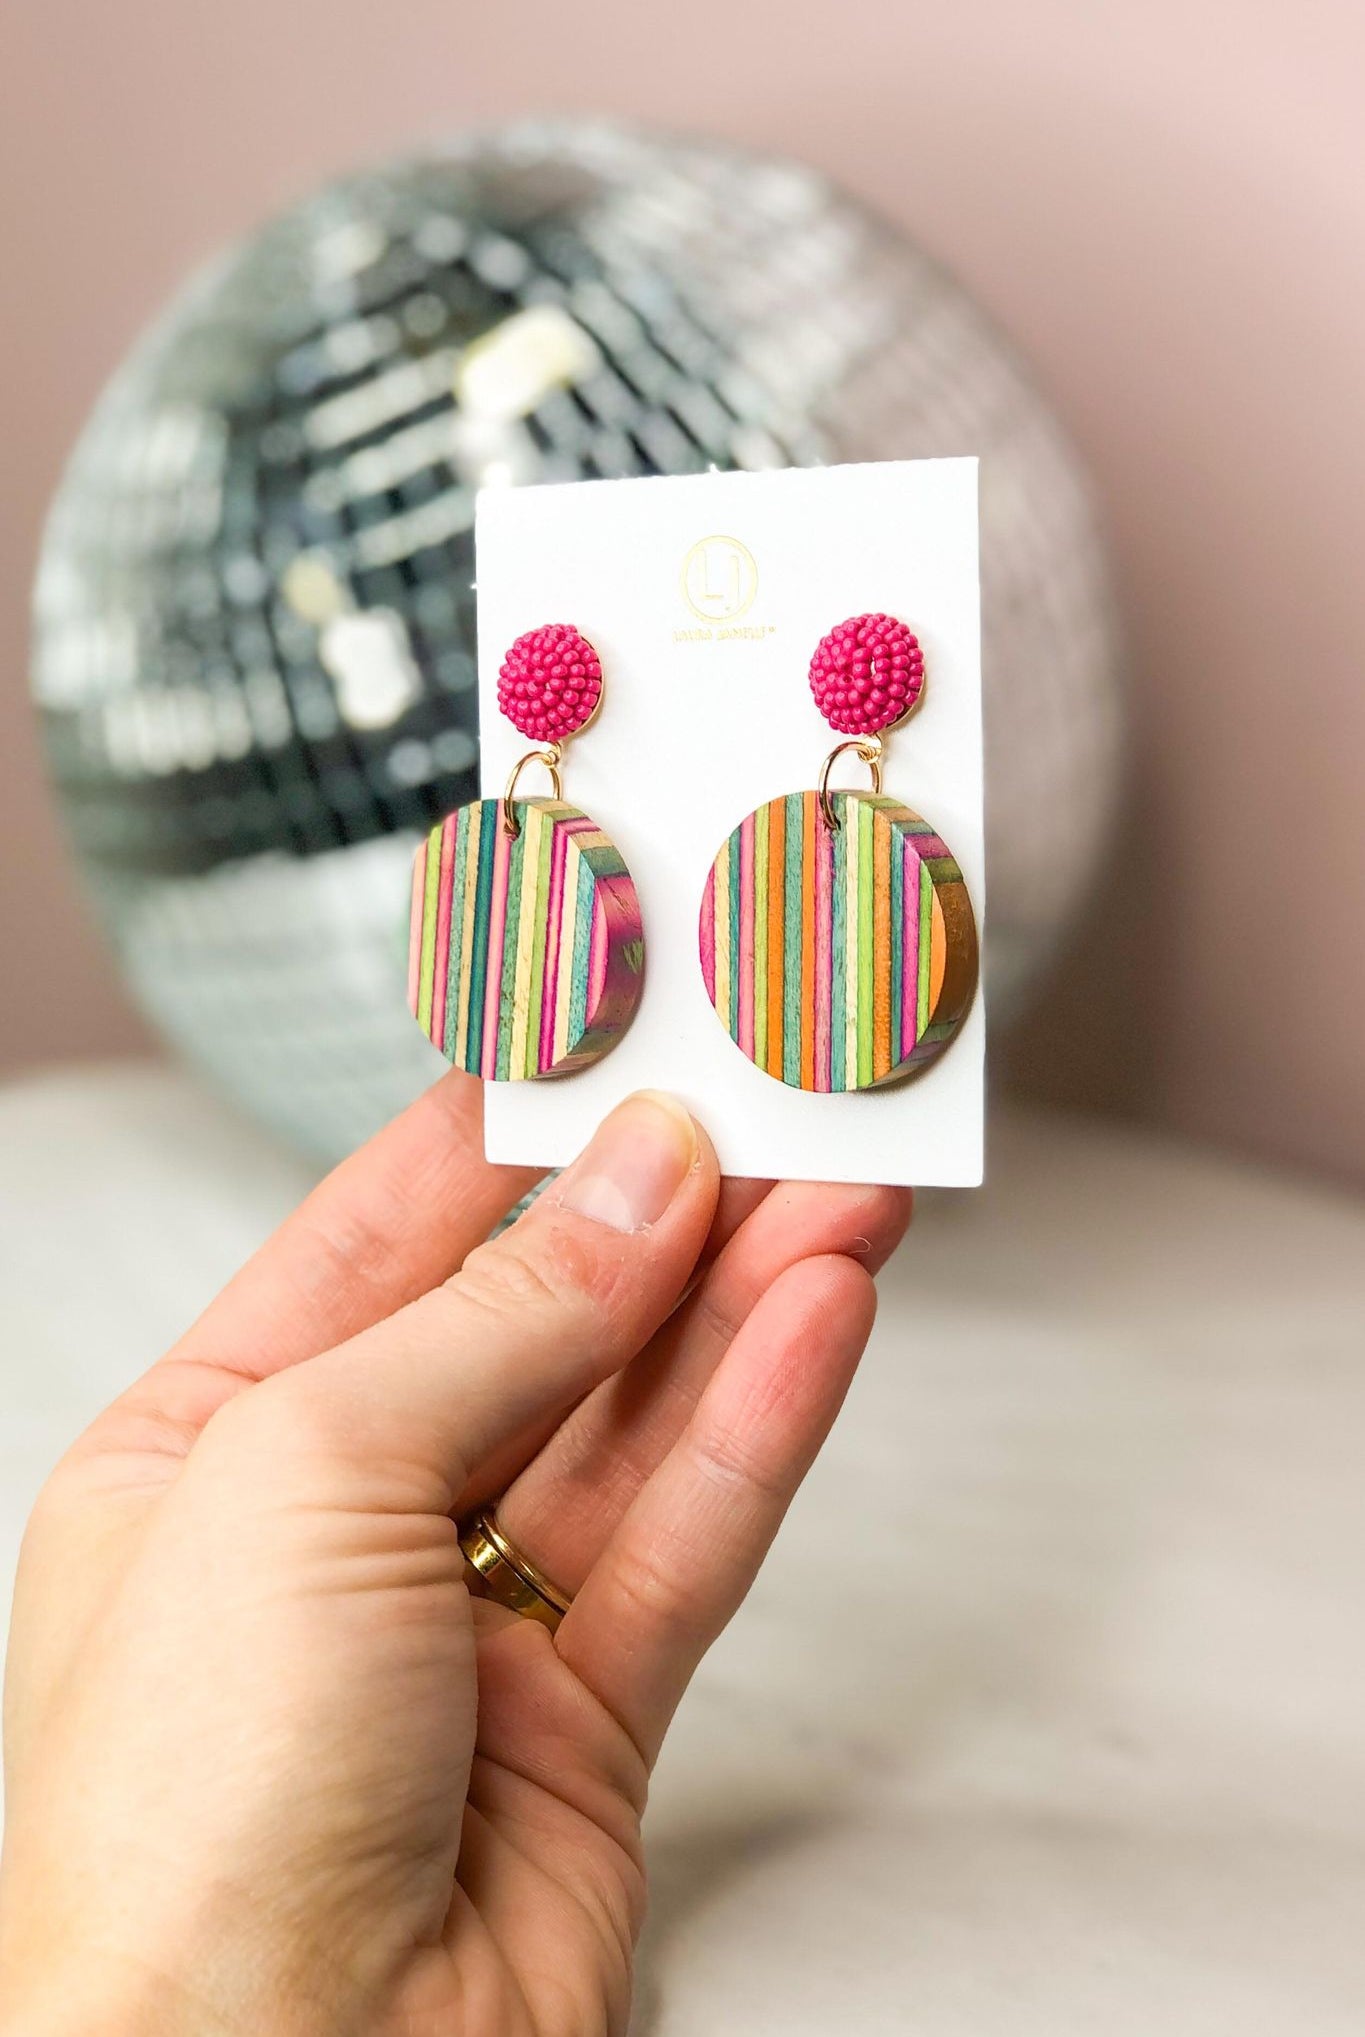 Colorful Wood Circle Stripe Earrings - Be You Boutique